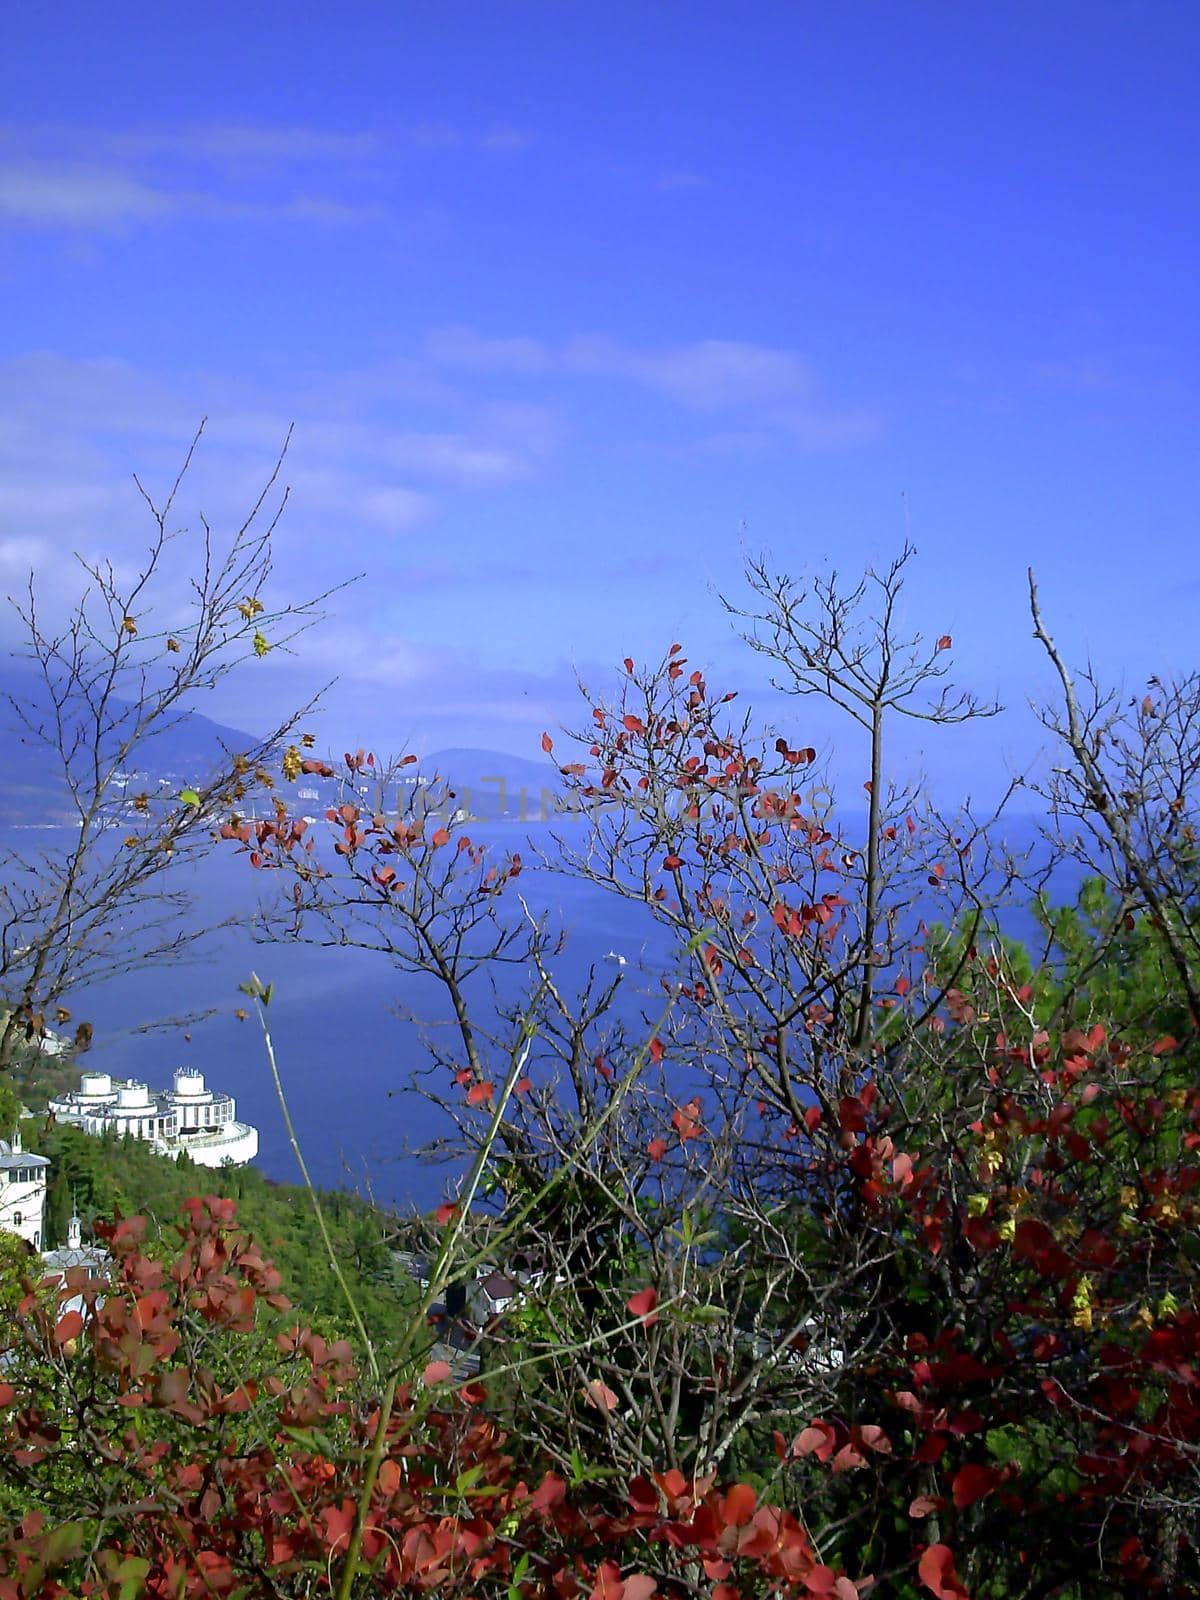 View of Yalta from the village of Livadia in the Crimea by NatalyArt